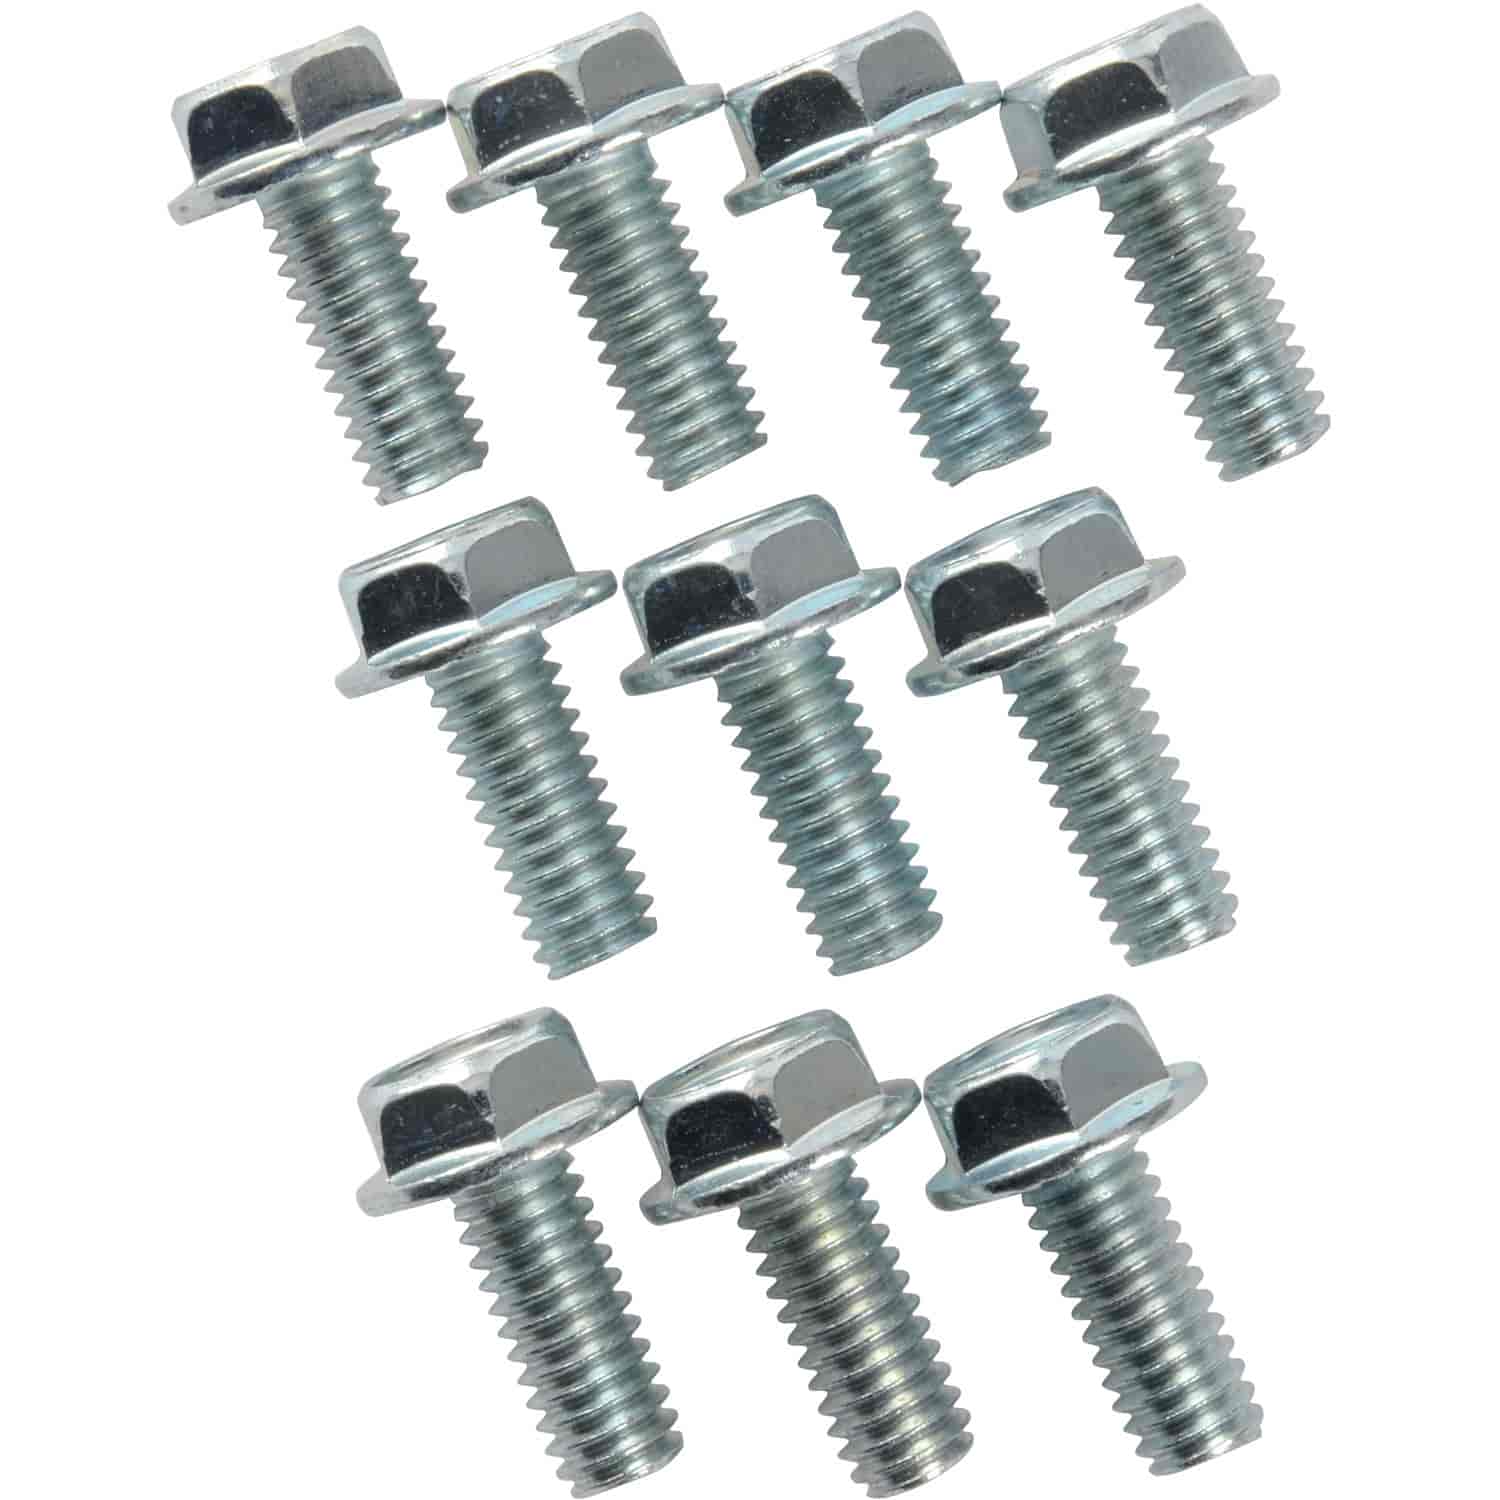 Zinc-Plated Differential Cover Bolts 5/16"-18 x 3/4"